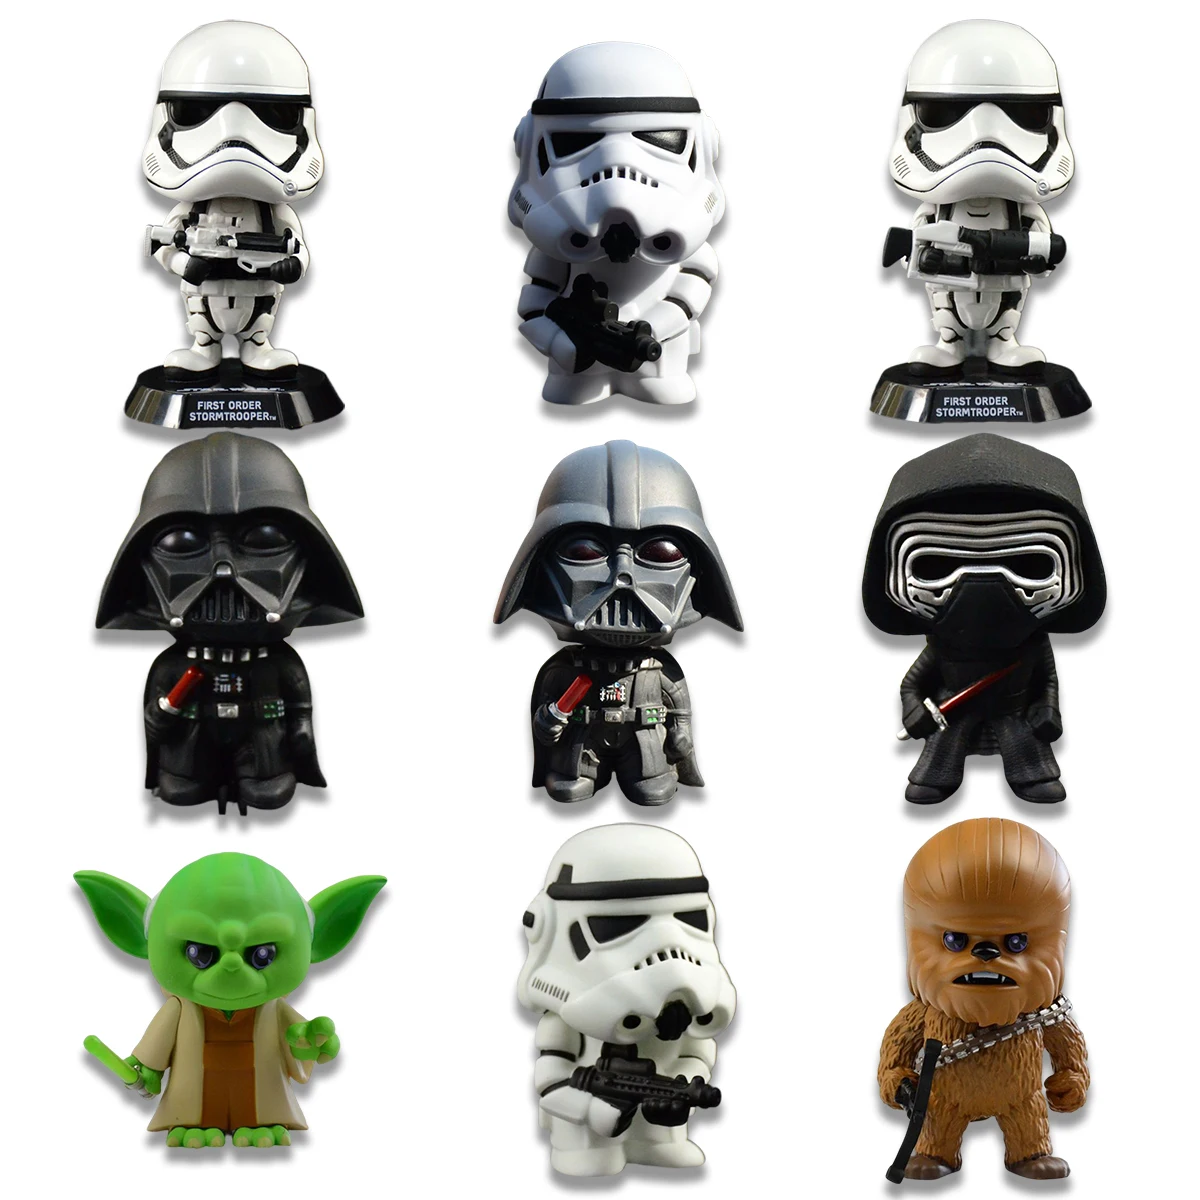 

Star Wars Animation Movies Peripheral Toys Q-Version Movable Dolls Figure Model Darth Vader Imperial Stormtrooper Kylo Ren